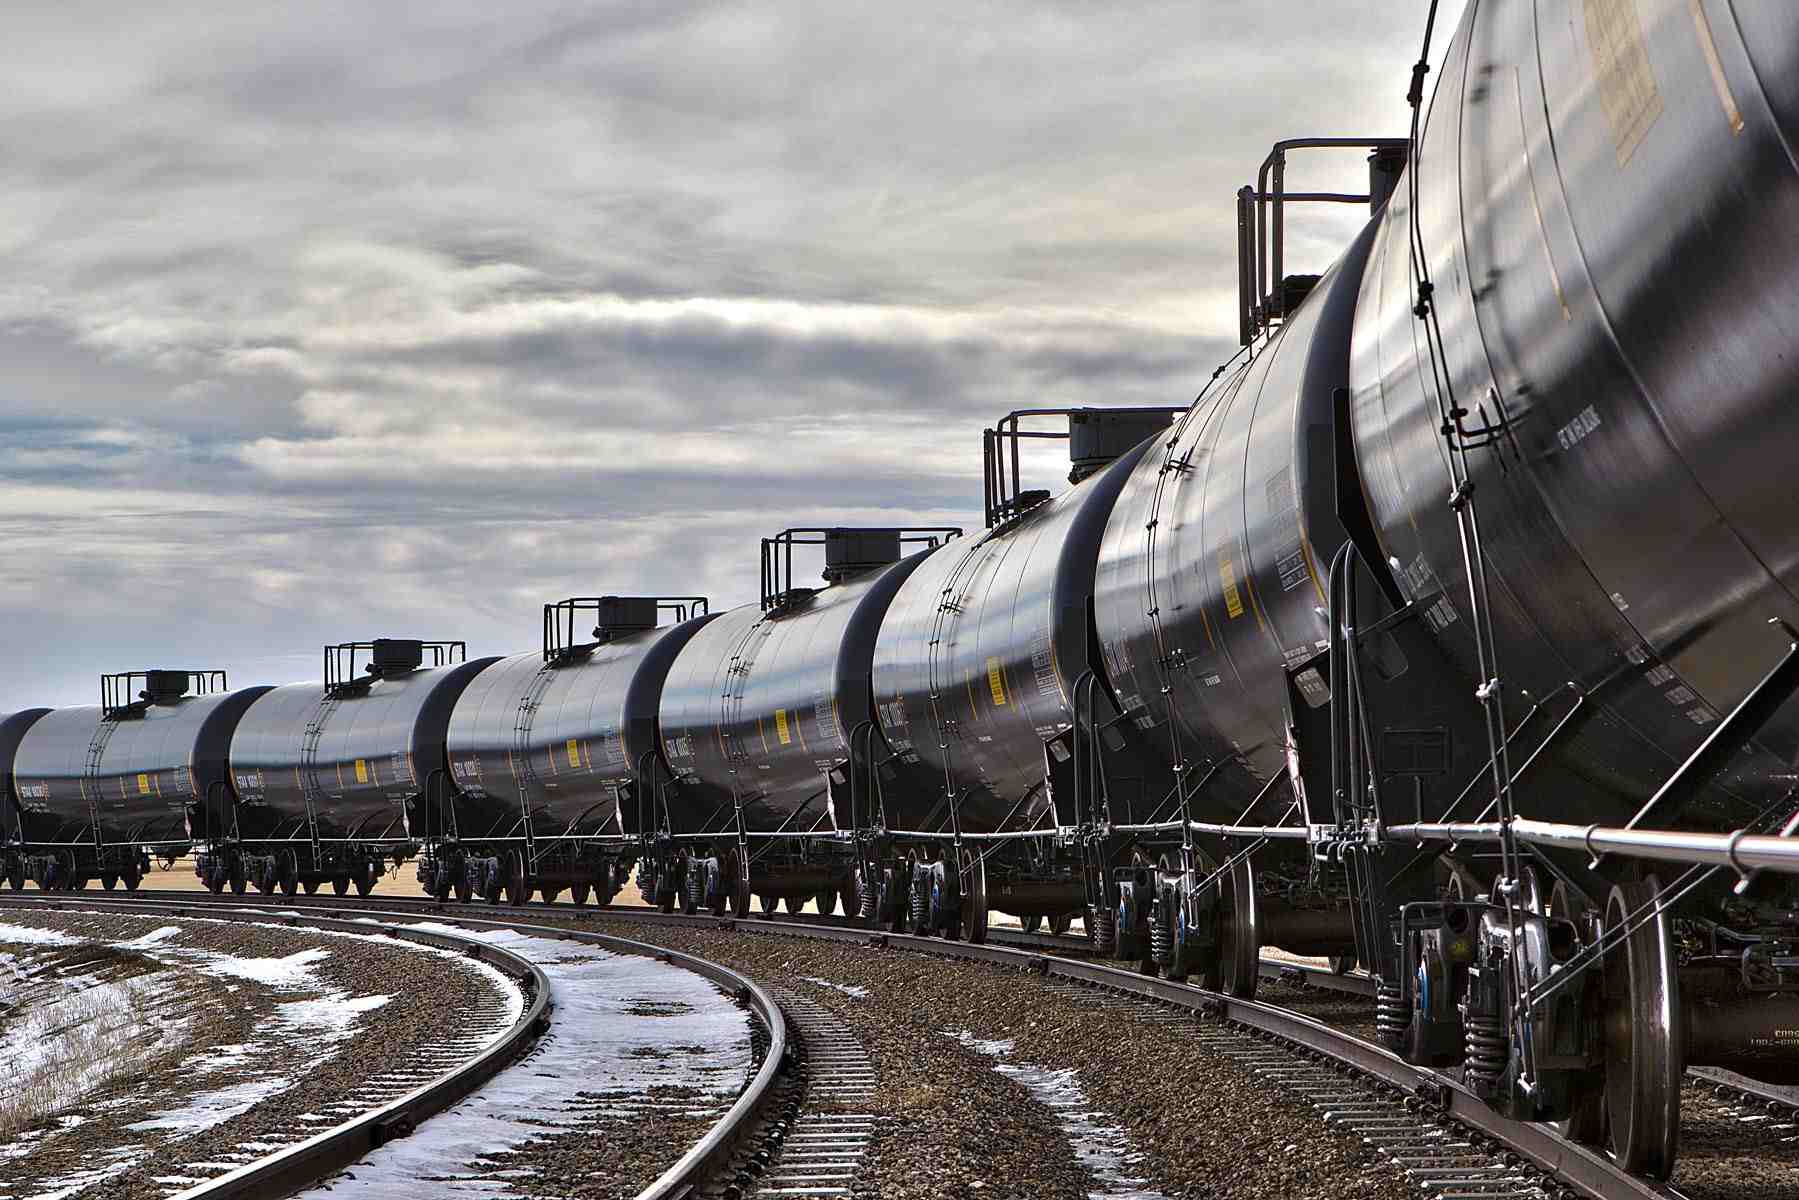 Snow-Covered Tranquility: Tank Cars Await Crude Oil Loading in Winter Scene